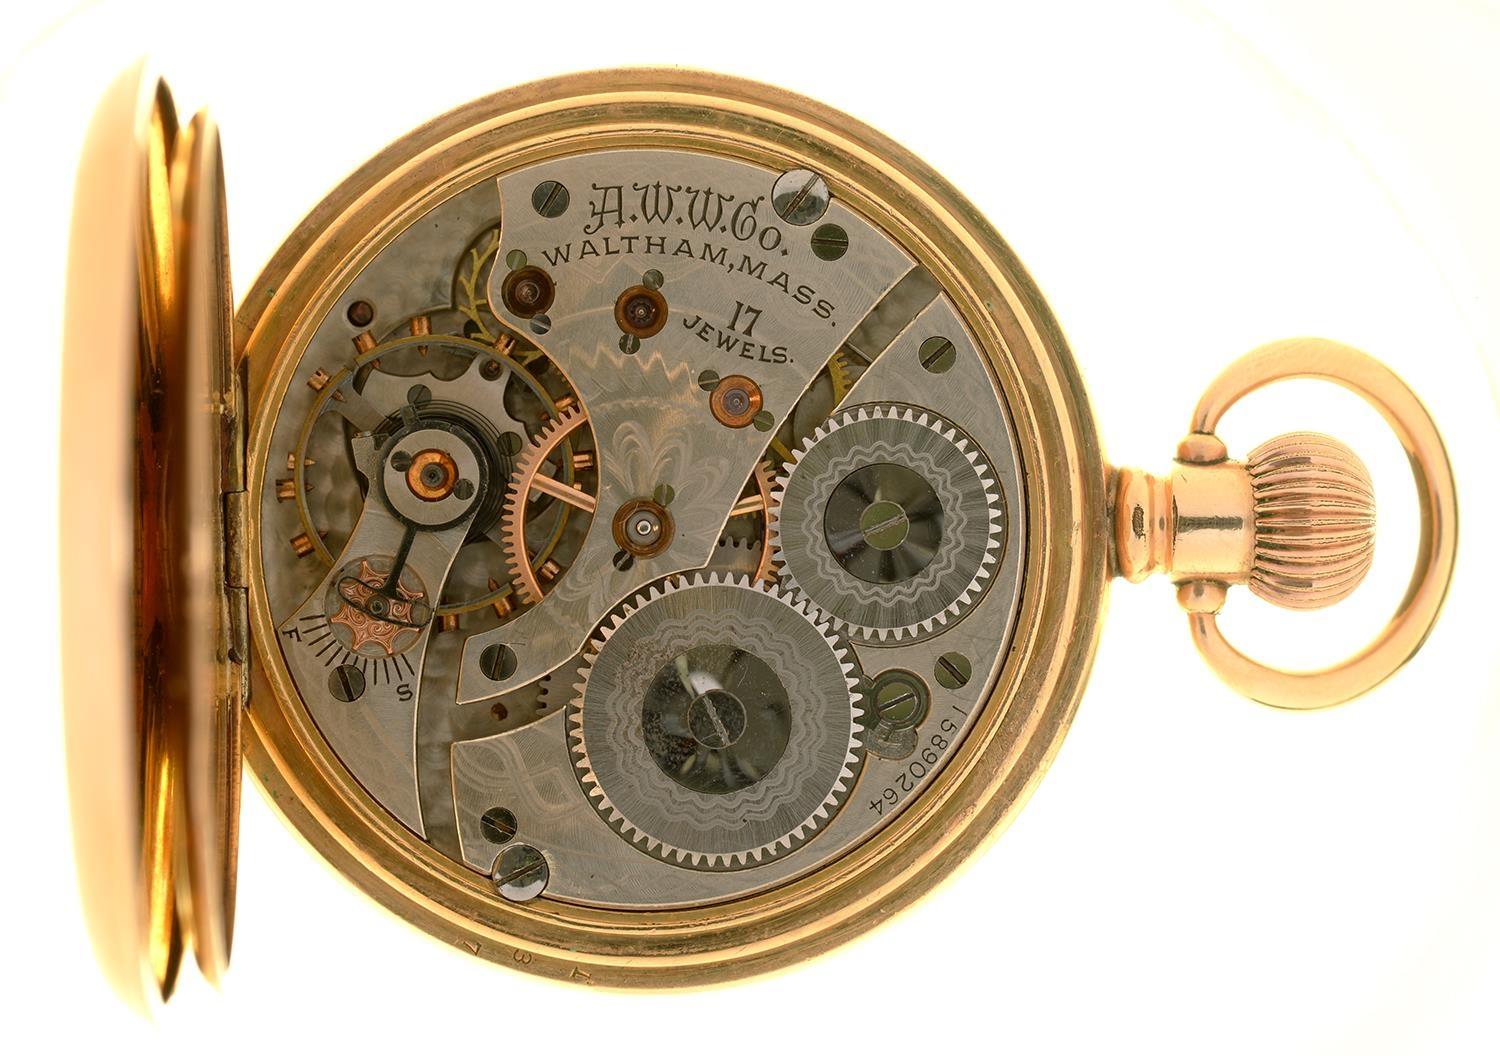 A THOMAS RUSSELL AND SONS GOLD PLATED KEYLESS LEVER WATCH AND A WALTHAM GOLD PLATED HUNTING CASED - Image 2 of 3